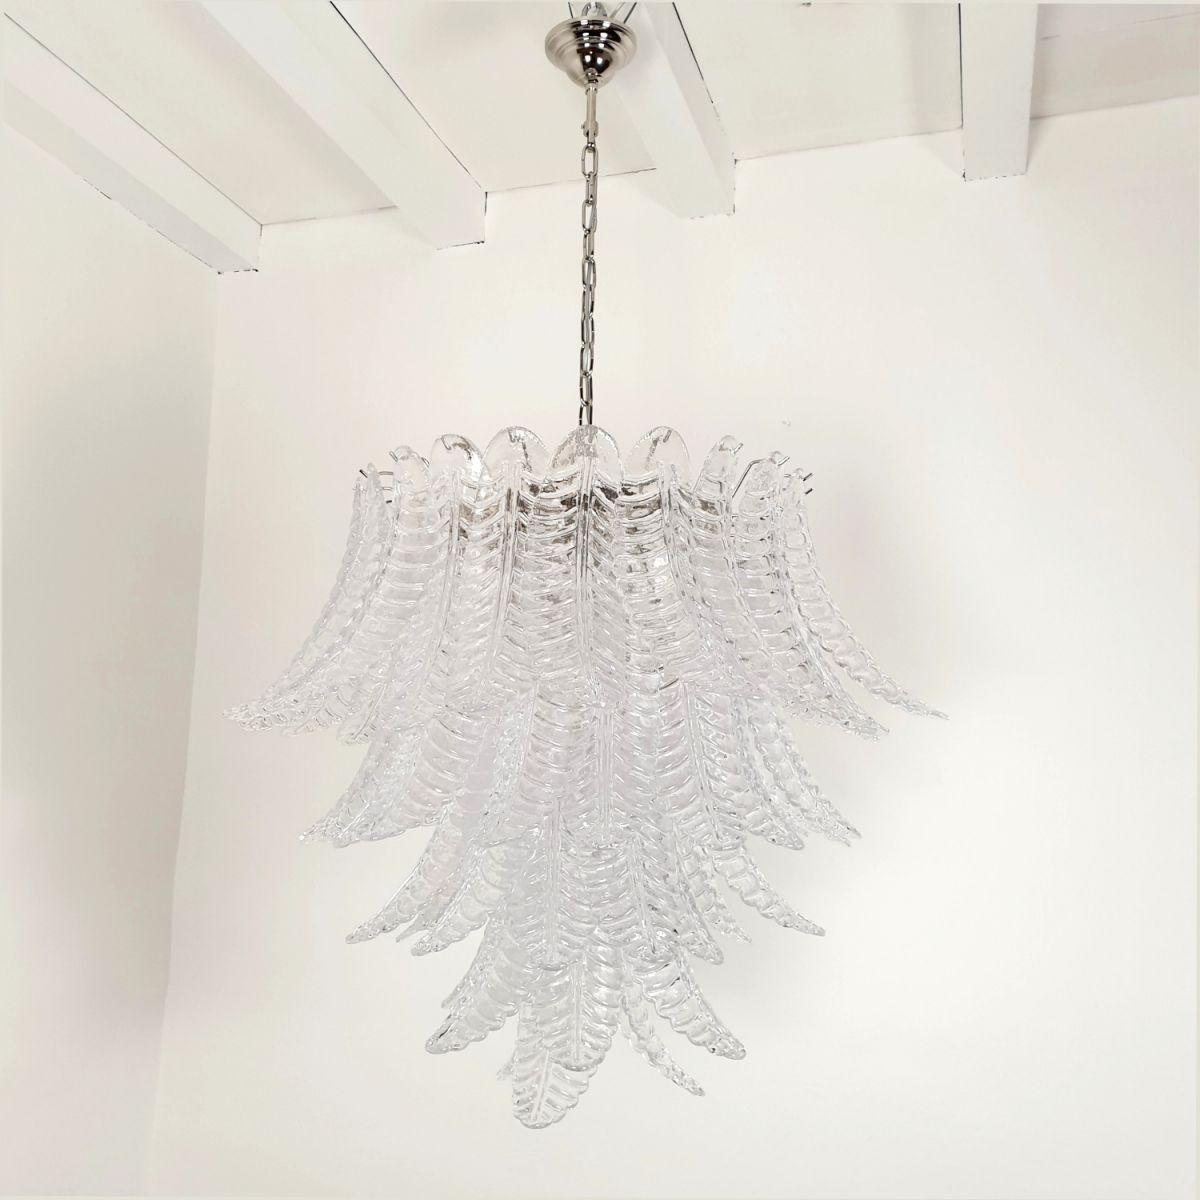 Large Mid Century Modern Murano glass chandelier, attributed to Mazzega, Italy 1970s.
The vintage chandelier is made of transparent Murano glass leaves and a chrome frame.
The Murano glass leaves are translucent.
The glasses are hand blown with a